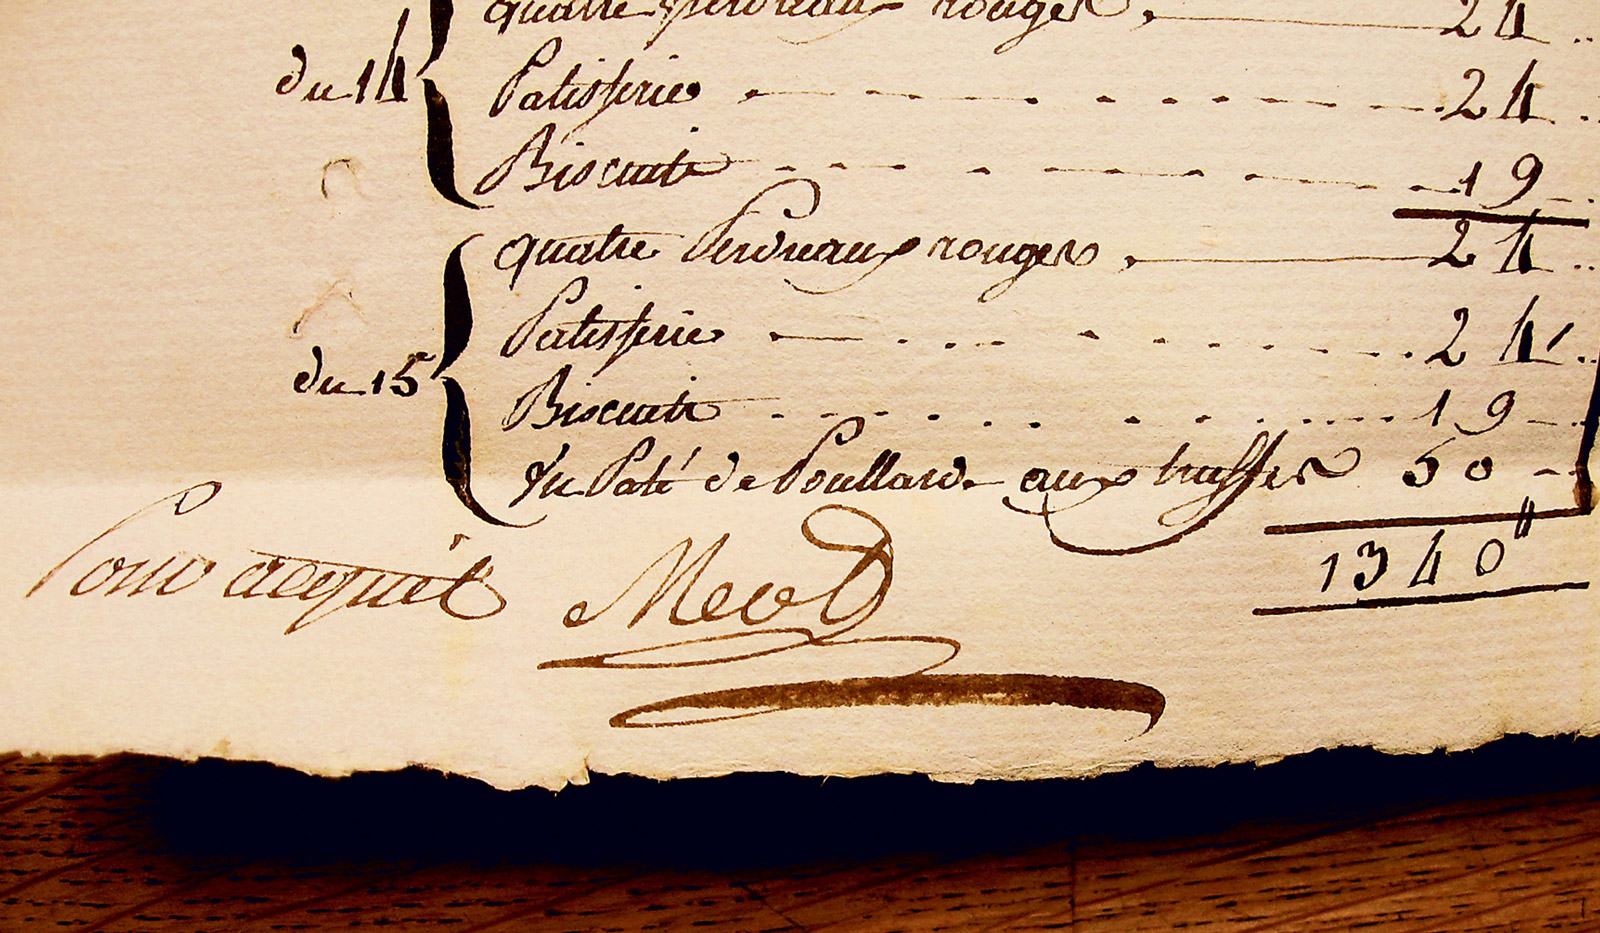 A photograph of a bill for food provided to the Committee of Public Safety. The bill is signed by the celebrated chef Méot. 